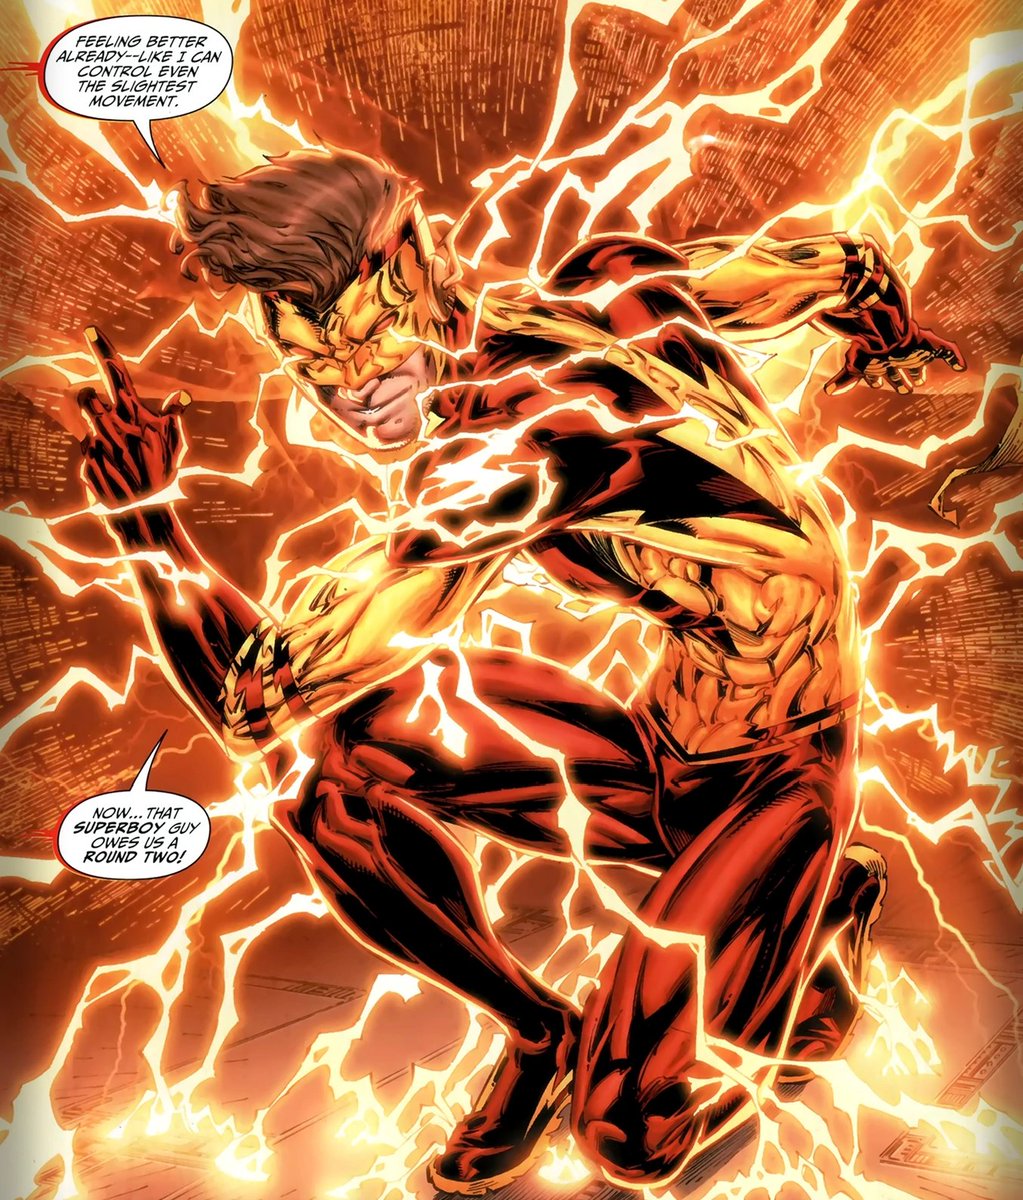 Bar Torr - Kid FlashA revolutionary from the future was sent back in time with no knowledge of who he is or what he did. He joined Tim Drakes Teen Titans and became a hero. He used the alias Bart Allen and thought he was related to Barry & chose the name Kid Flash to honor him.